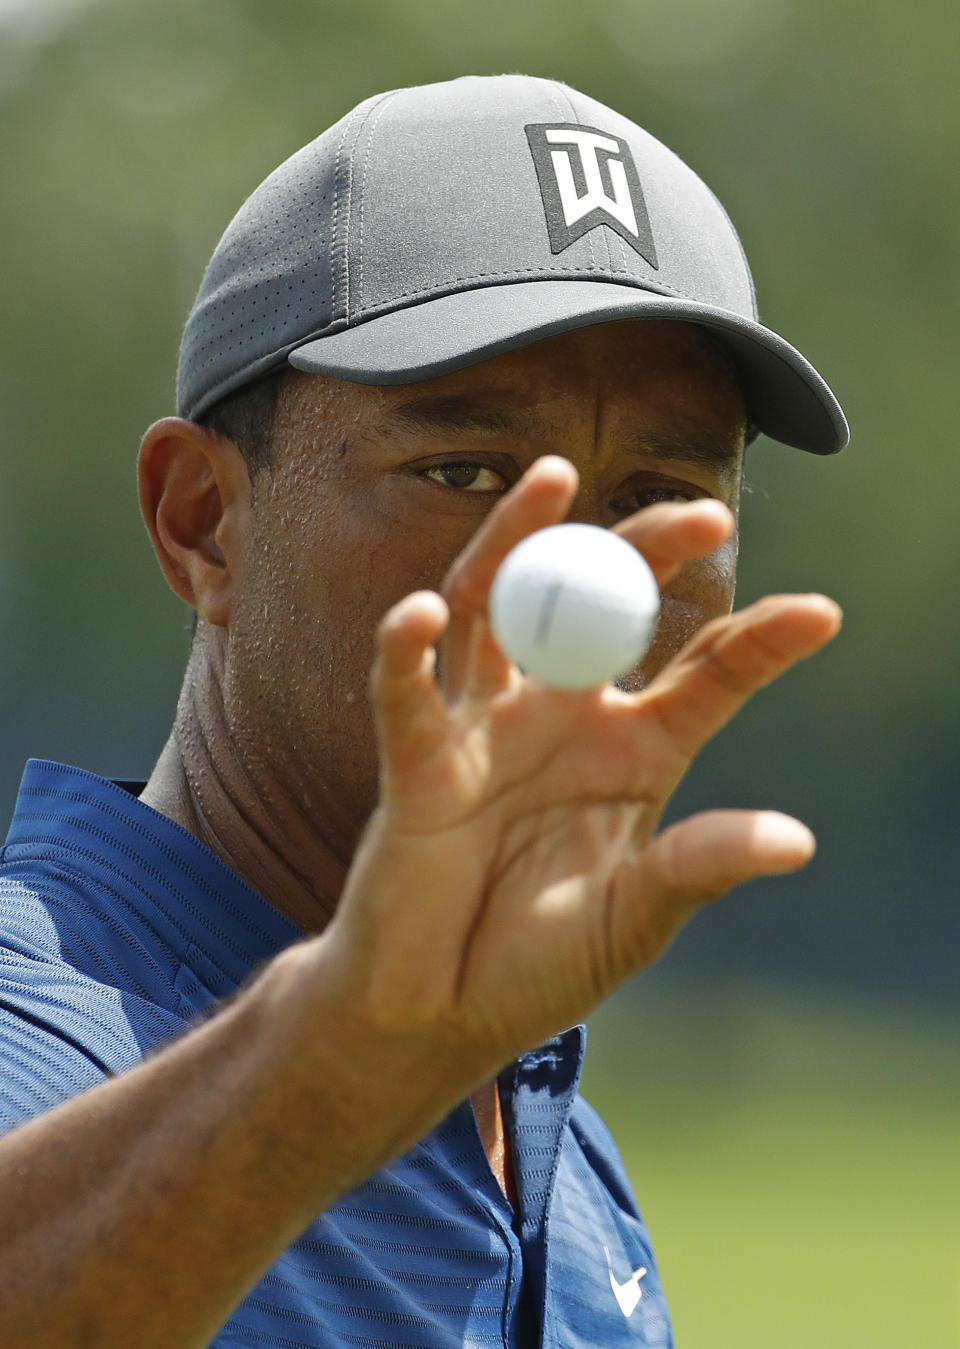 Tiger Woods catches a golf ball while hitting on the driving range during a practice round for the PGA Championship golf tournament at Bellerive Country Club, Wednesday, Aug. 8, 2018, in St. Louis. (AP Photo/Charlie Riedel)